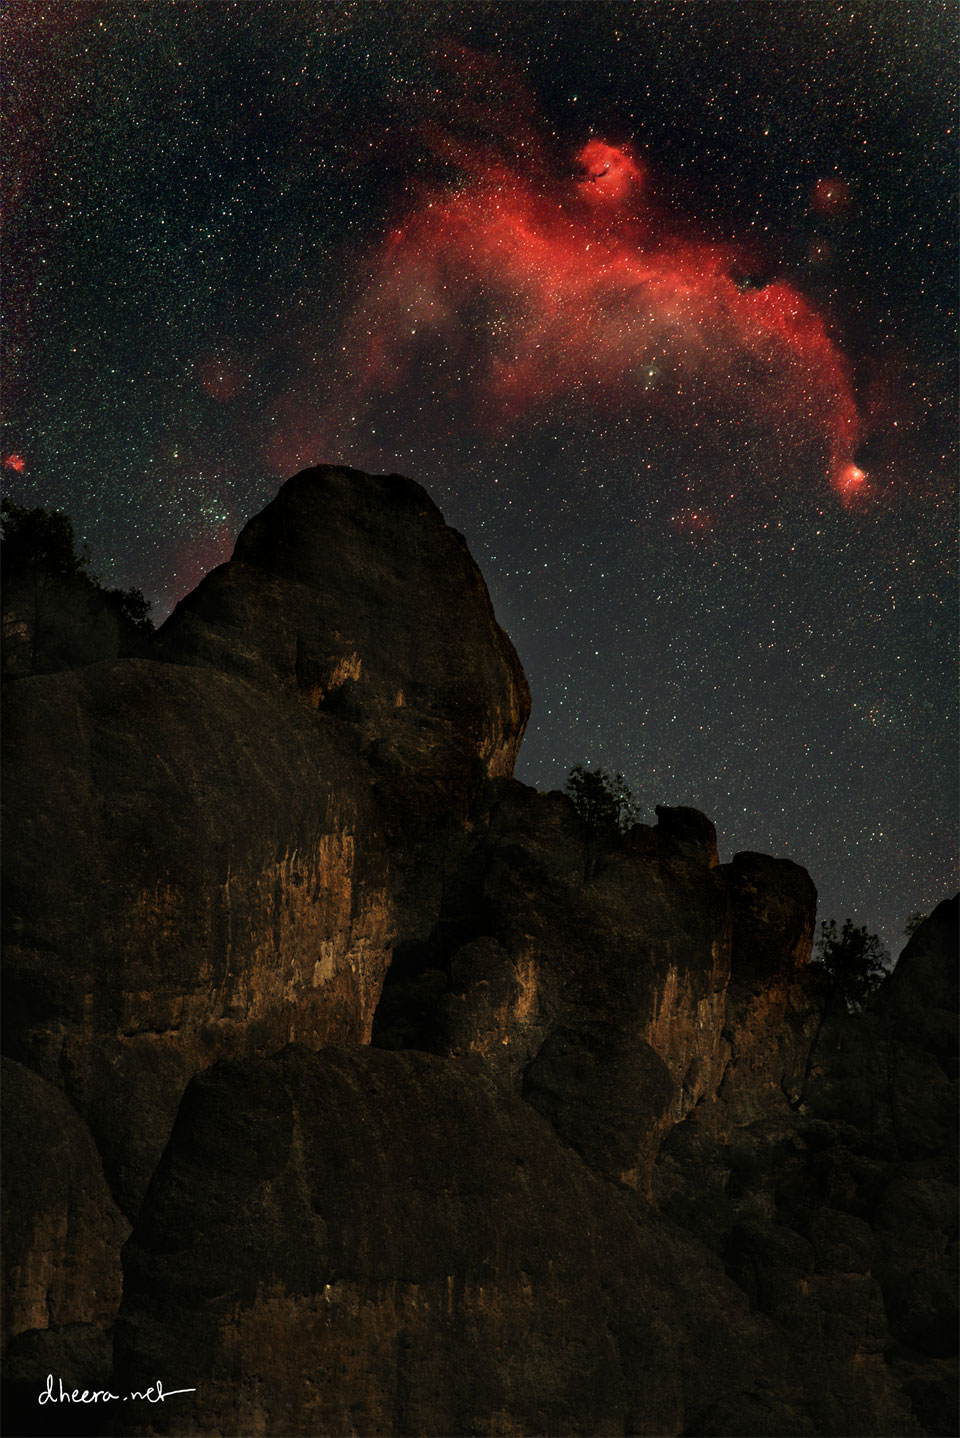 A red nebula in a dark starry sky is seen above a rocky
peak. The nebula appears similar to a flying bird.
Please see the explanation for more detailed information.